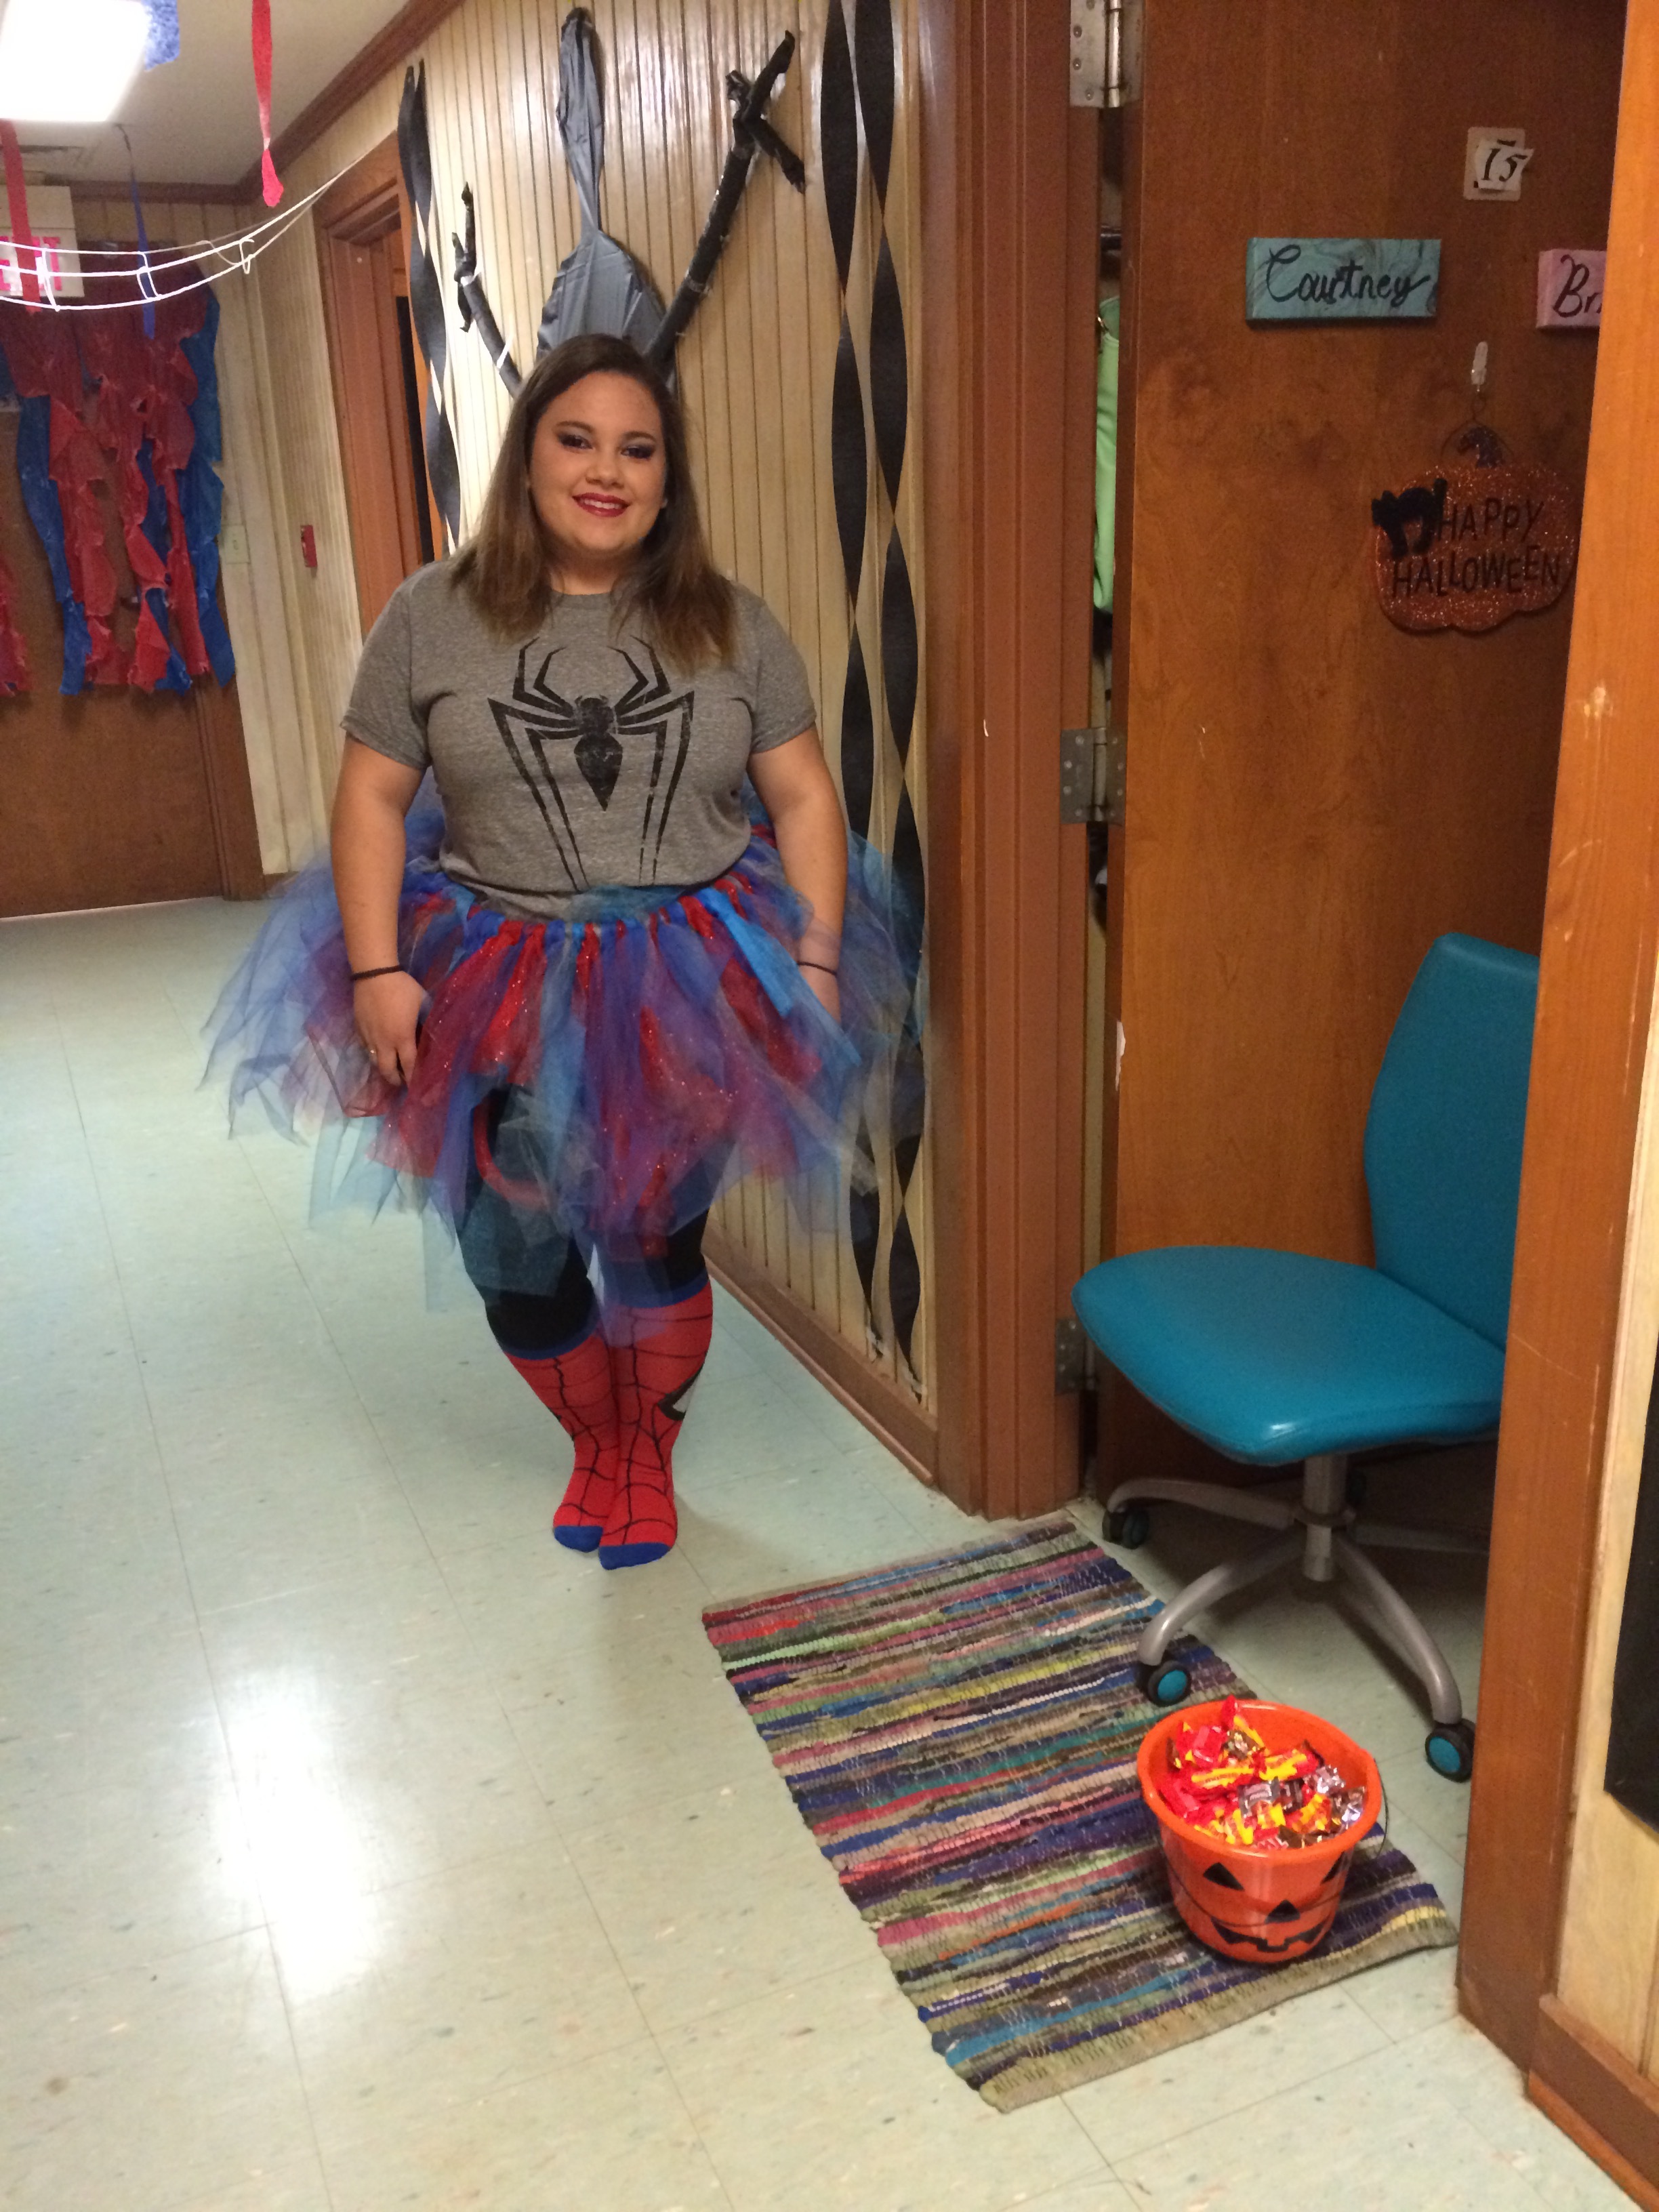 Brieanna McCall prepared for trick-or-treaters in Hortan Tingle.